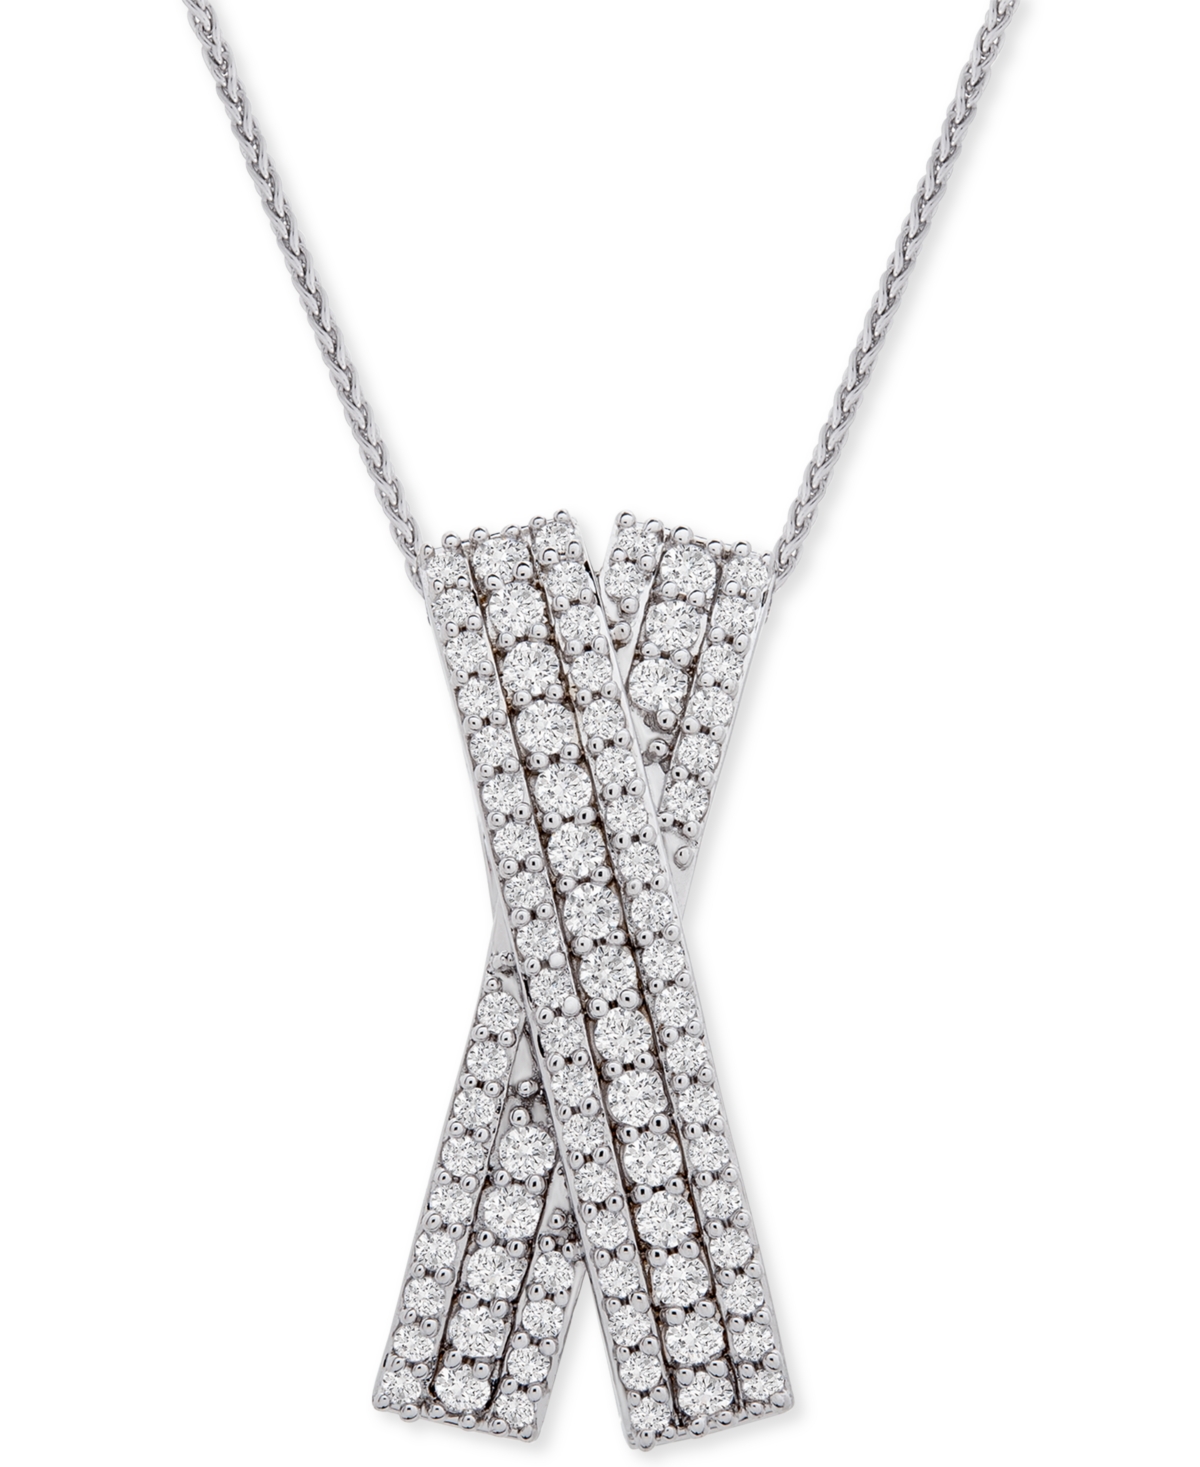 Diamond Multi-Row Crossover 20" Pendant Necklace (1 ct. t.w.) in Sterling Silver, Created for Macy's - Sterling Silver